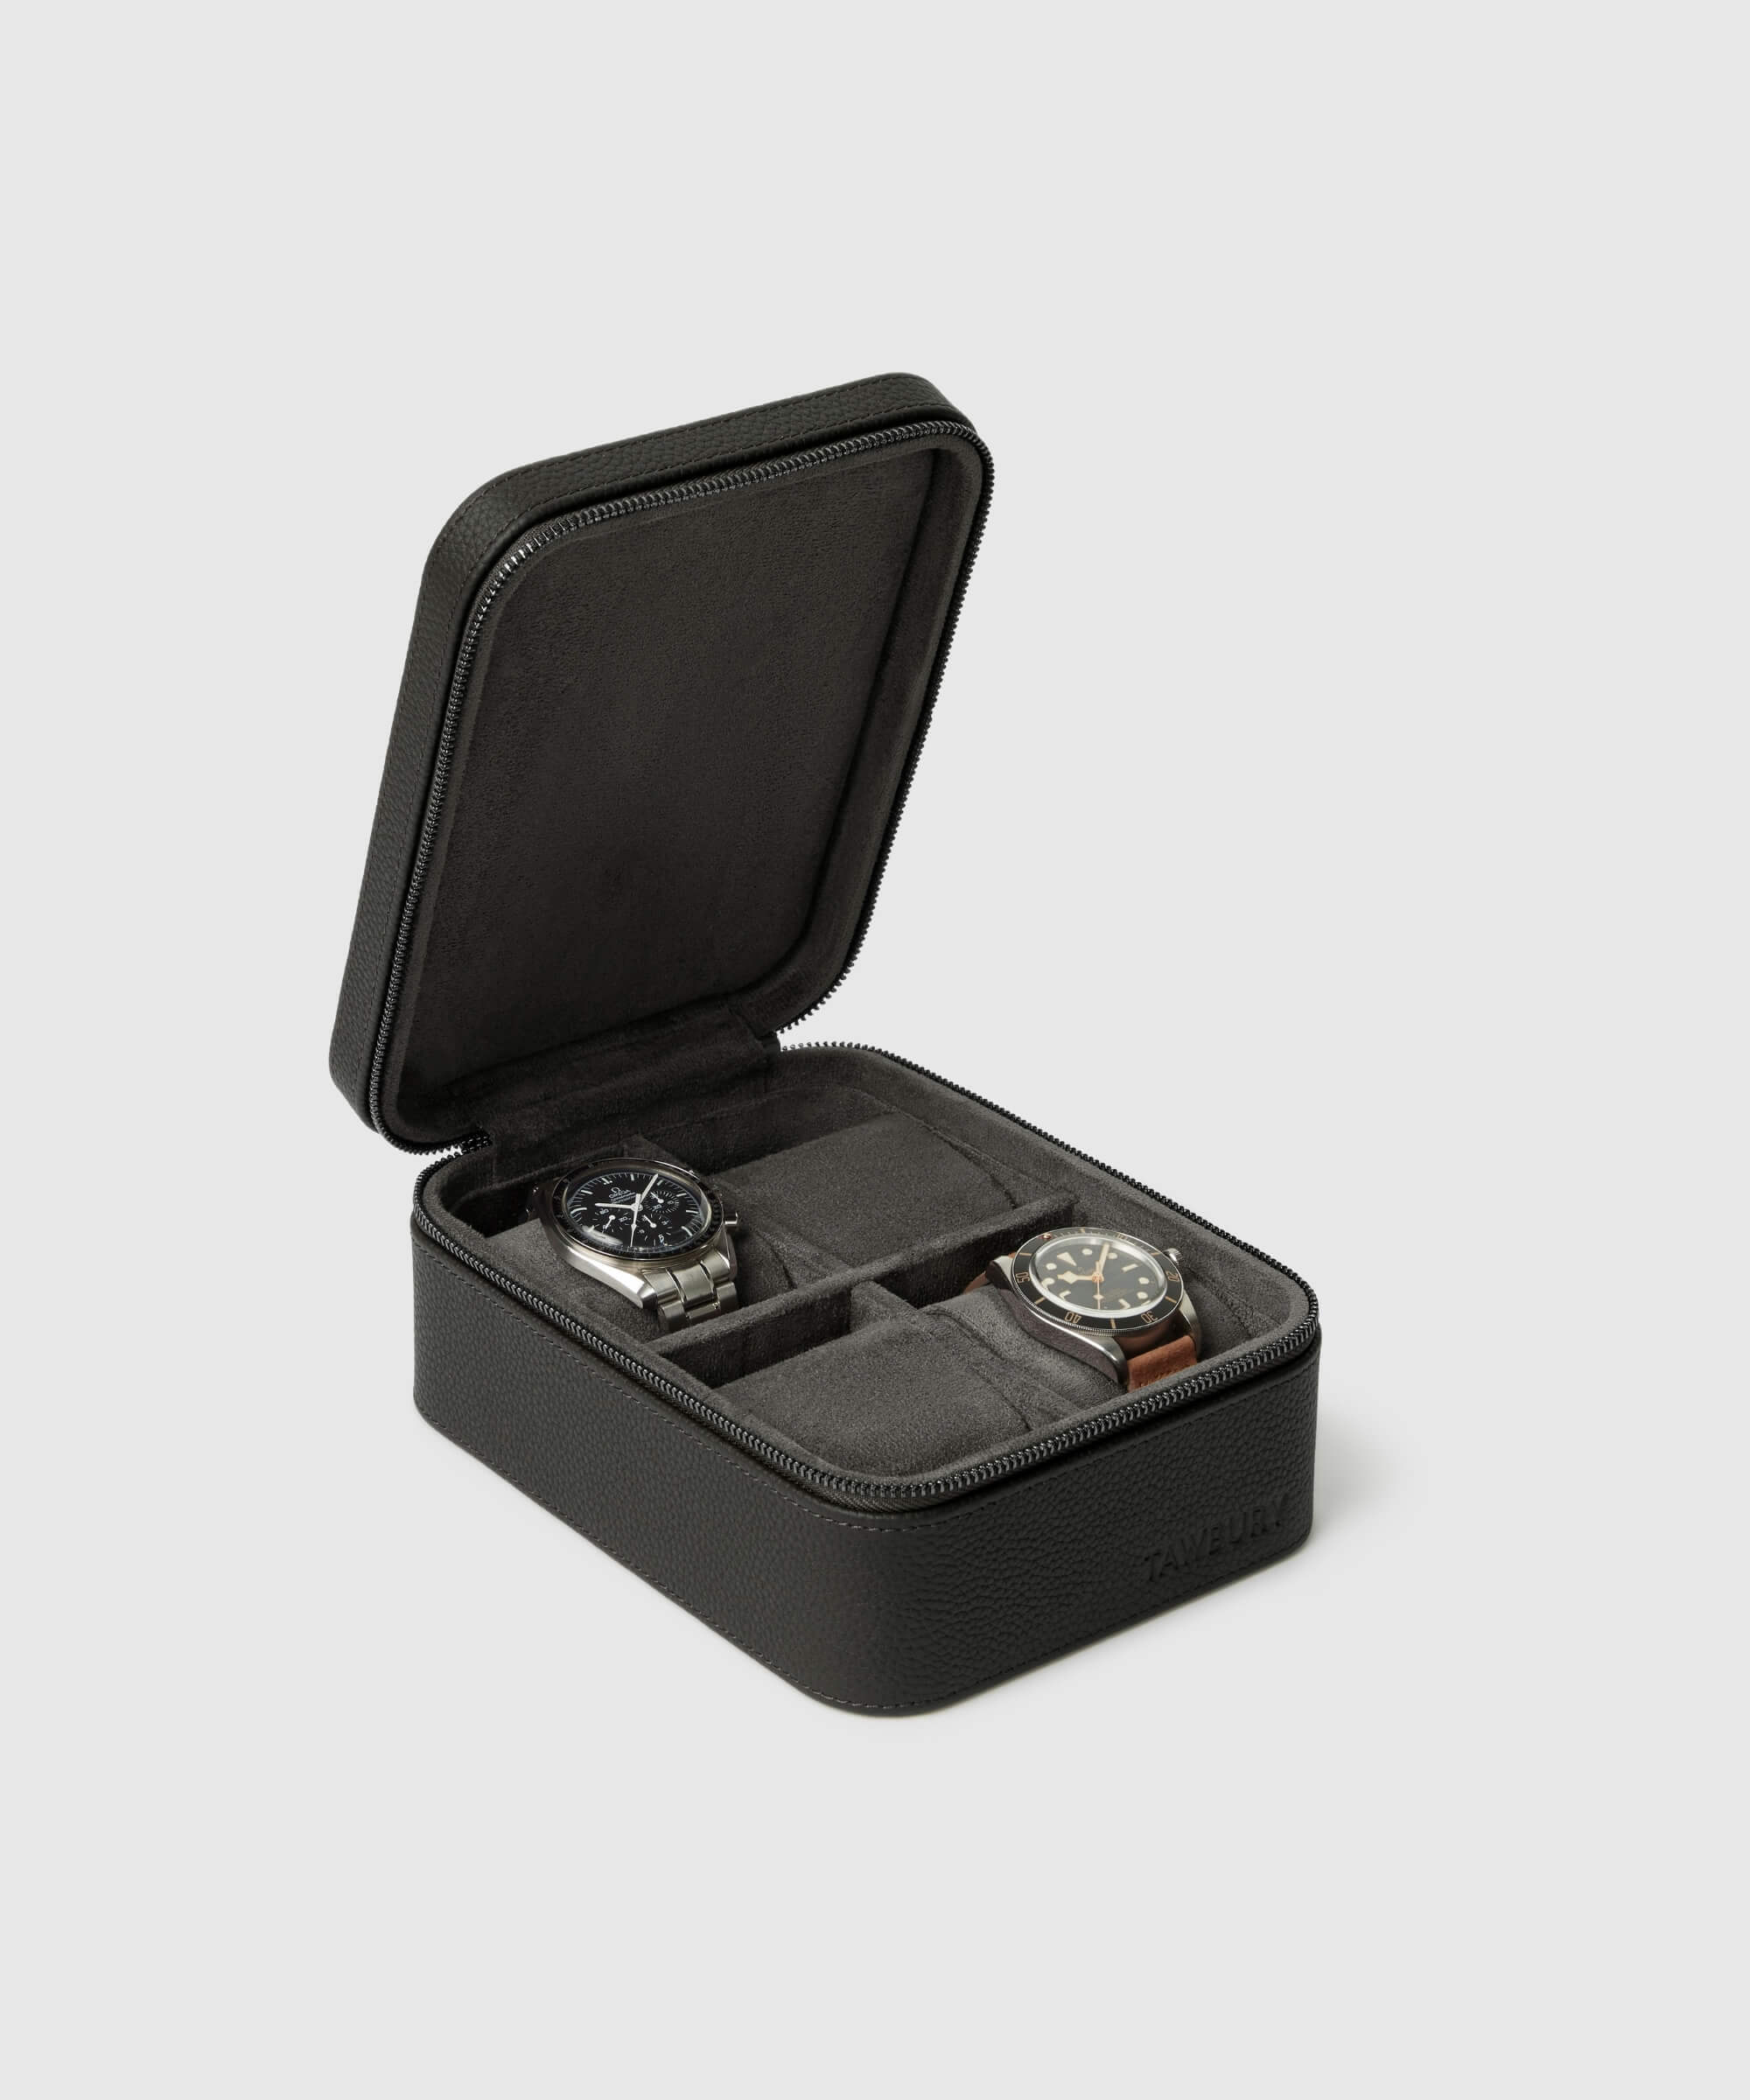 A black rectangular leather watch case with a zip closure is open to reveal two wristwatches from the Fraser 4 Watch Travel Case - Black (Coming Soon) by TAWBURY, each in separate compartments - an ideal choice for stylish and secure watch storage.